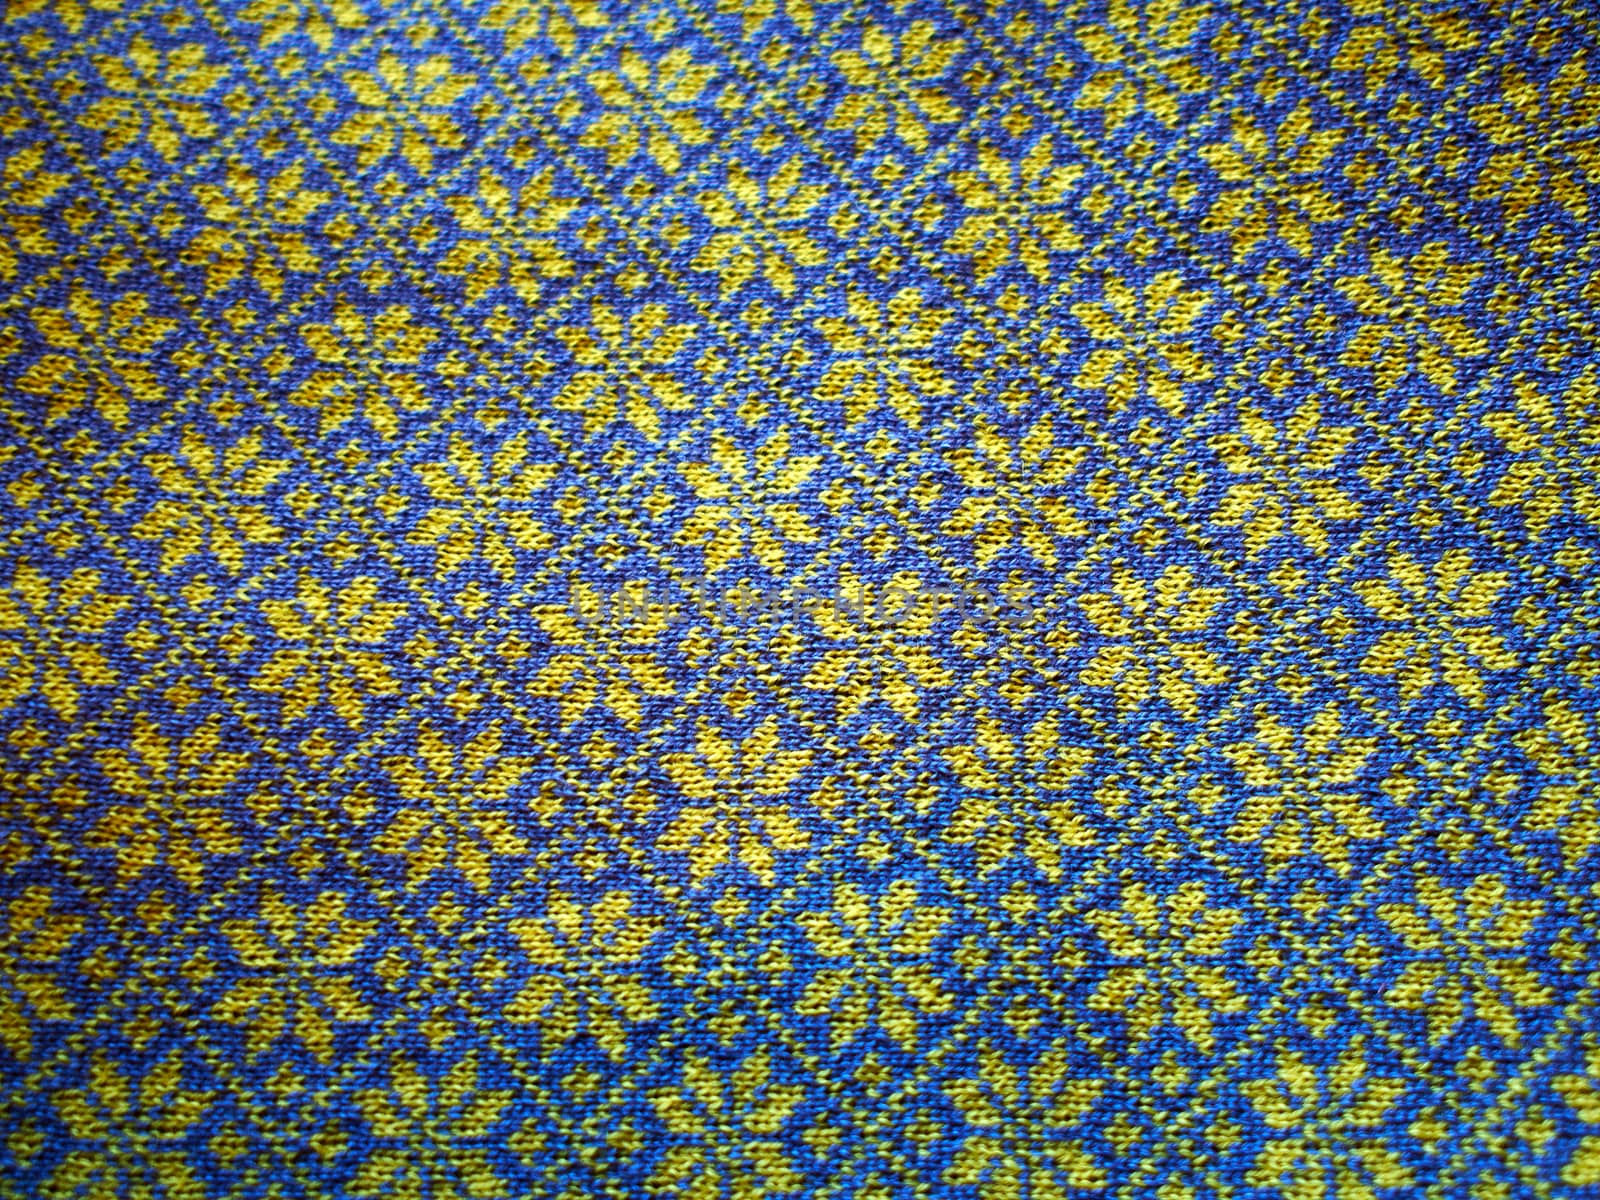 Closeup of a handmade wool sweater with Icelandic traditional typical pattern in blue and yellow colors